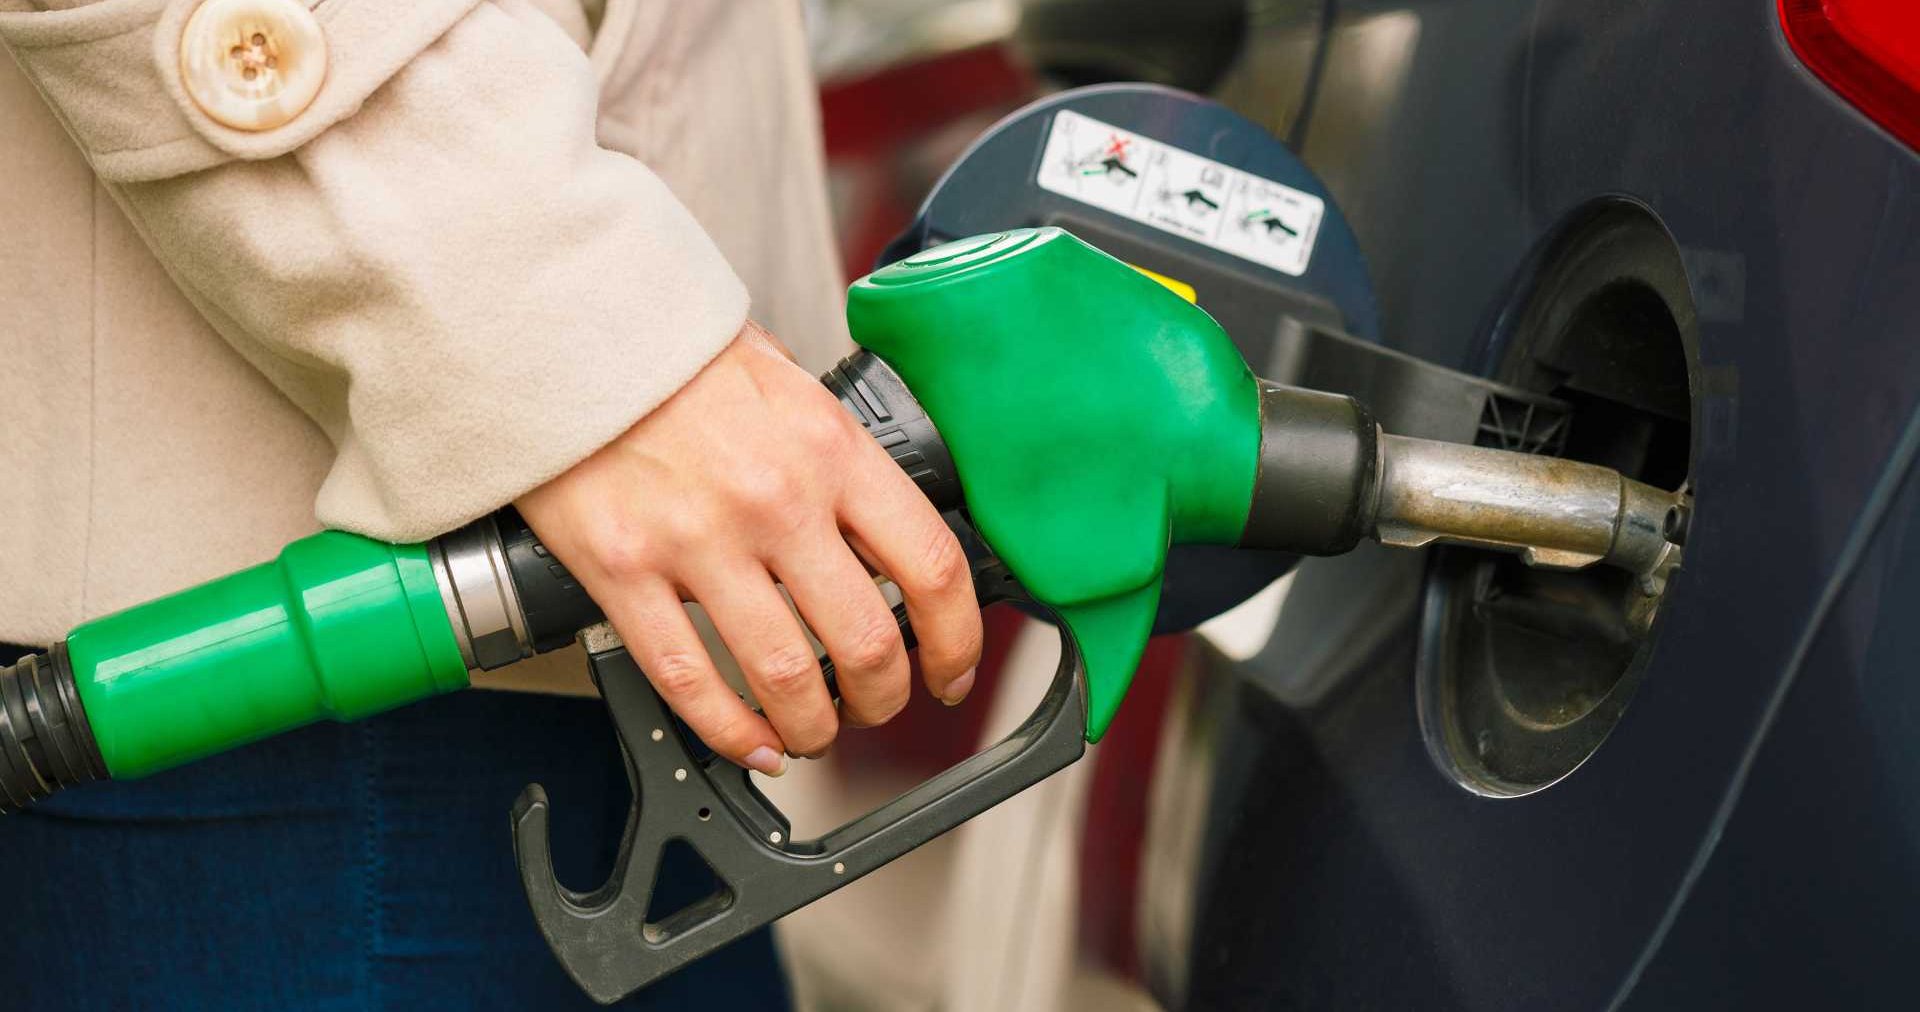 Lifetime Fuel Expenditure Under the Microscope in New Research Study